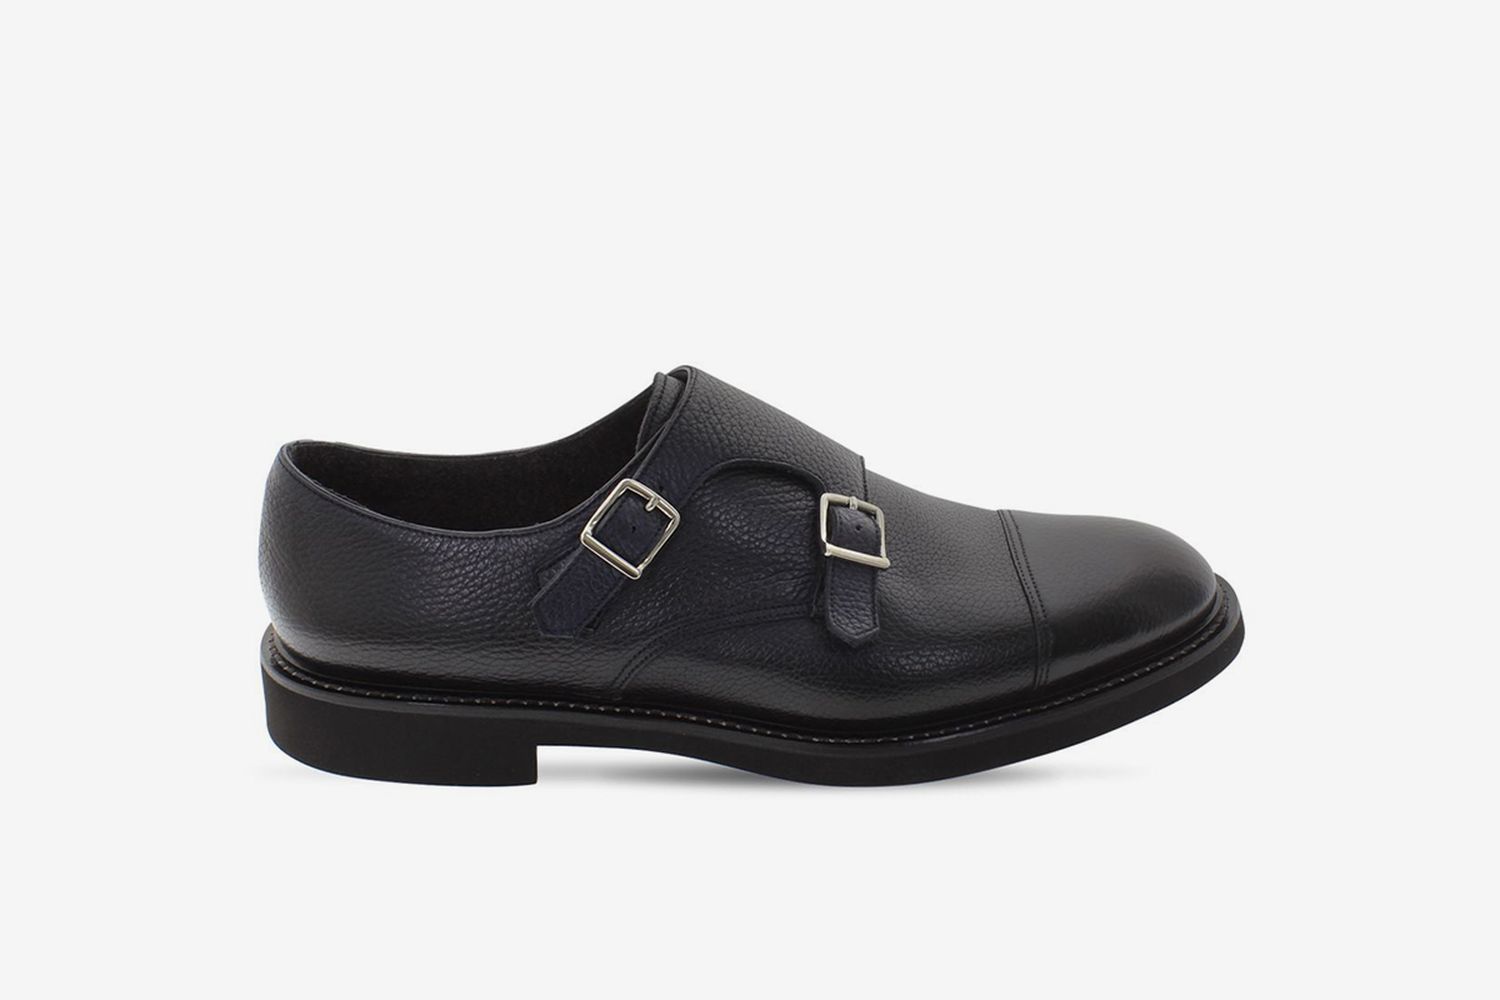 Double Buckle Leather Shoes